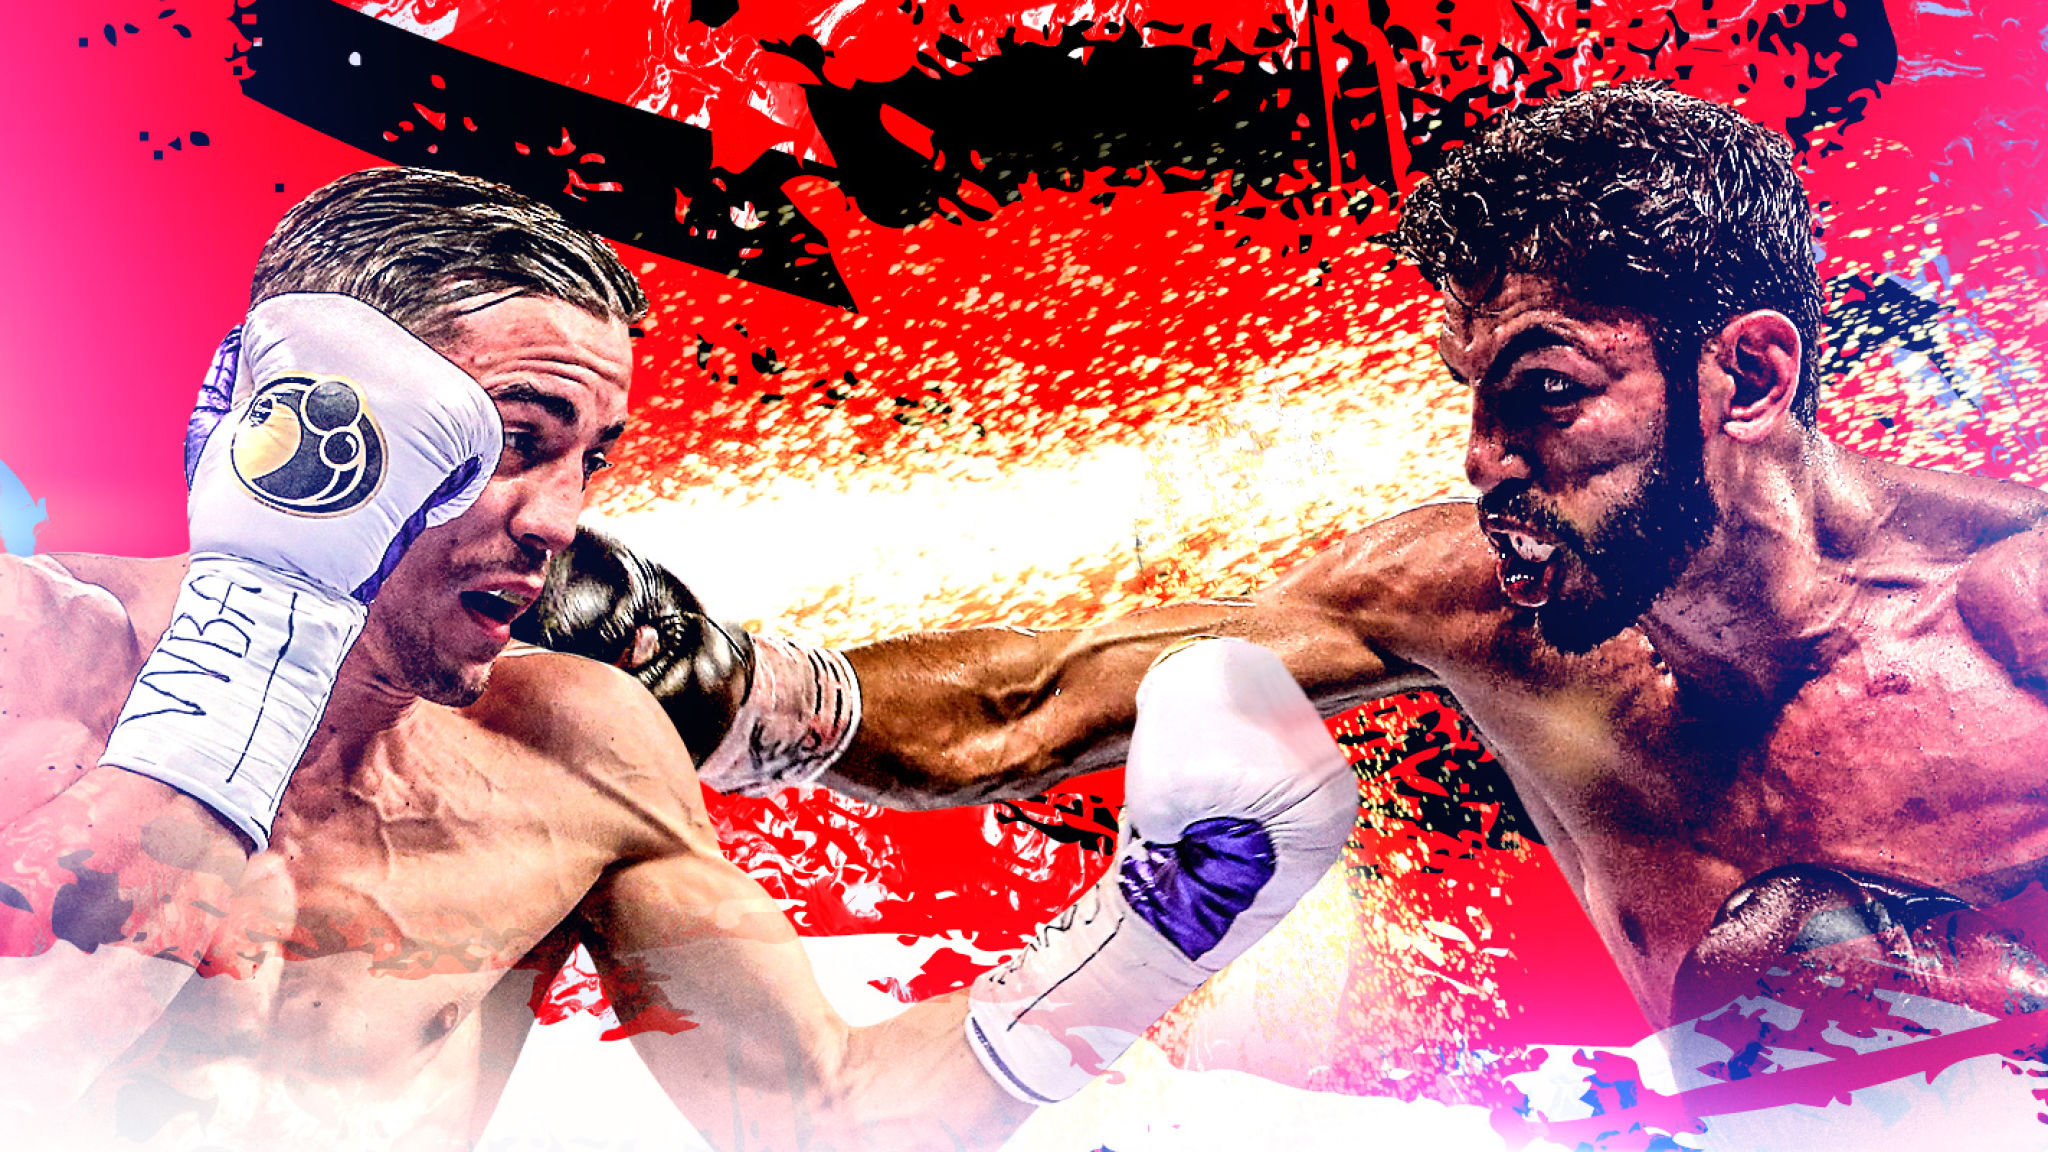 Home / Boxing News / Countdown: Crolla vs. Linares Countdown: Crolla vs. Linares By Robert Ecksel    Updated: 24/08/2016 “I'm honored to be getting these big fights, but I'm hungrier than ever.” “I’m honored to be getting these big fights, but I’m hungrier than ever.”